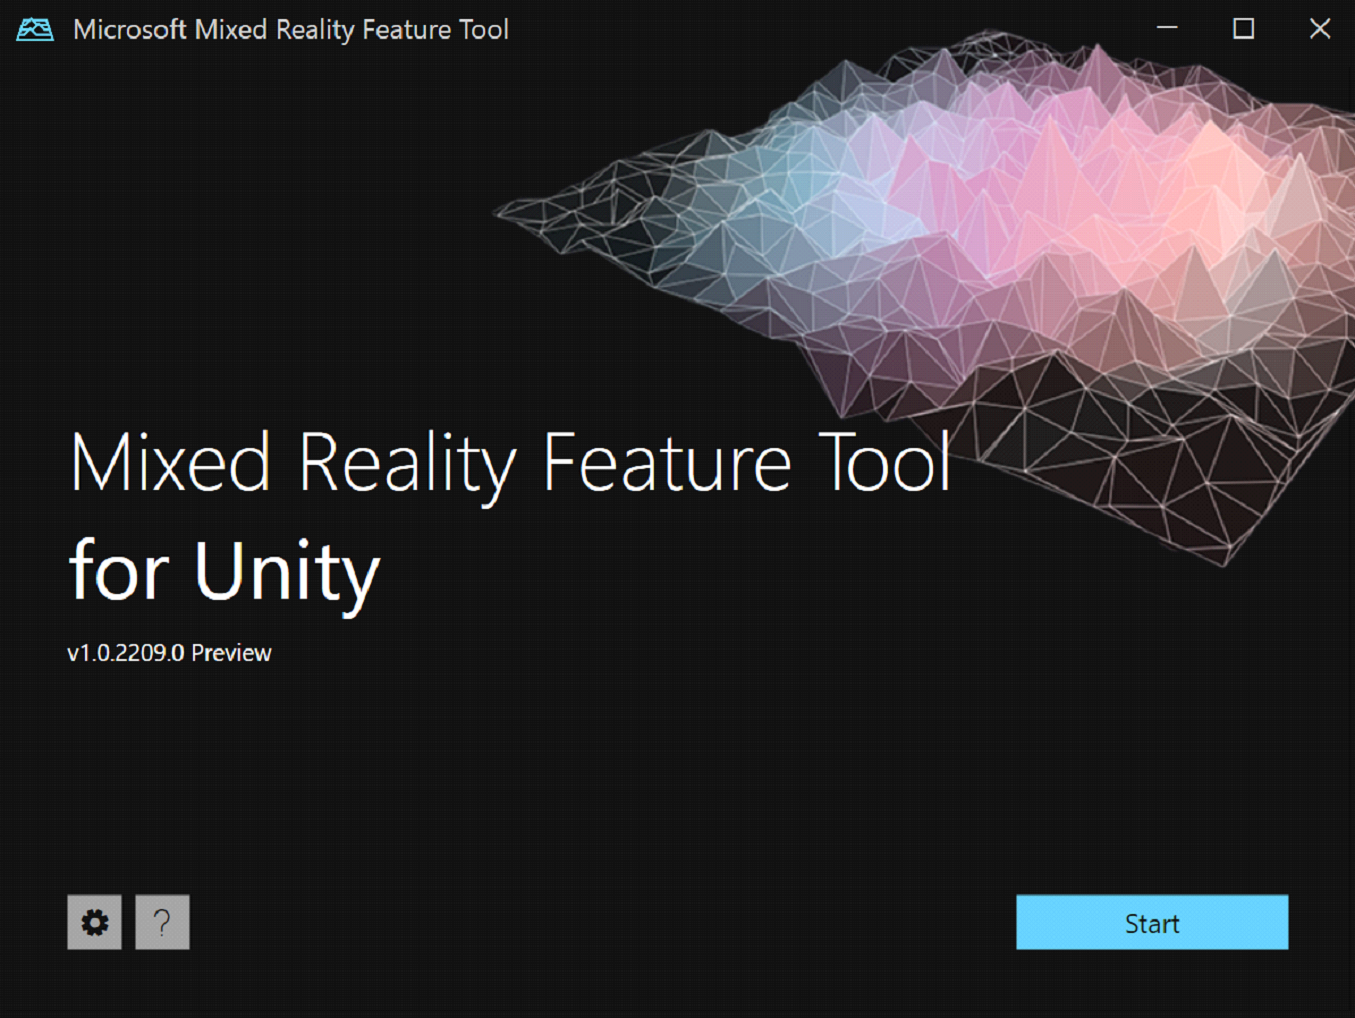 Screenshot of the Mixed Reality Feature Tool opening screen.